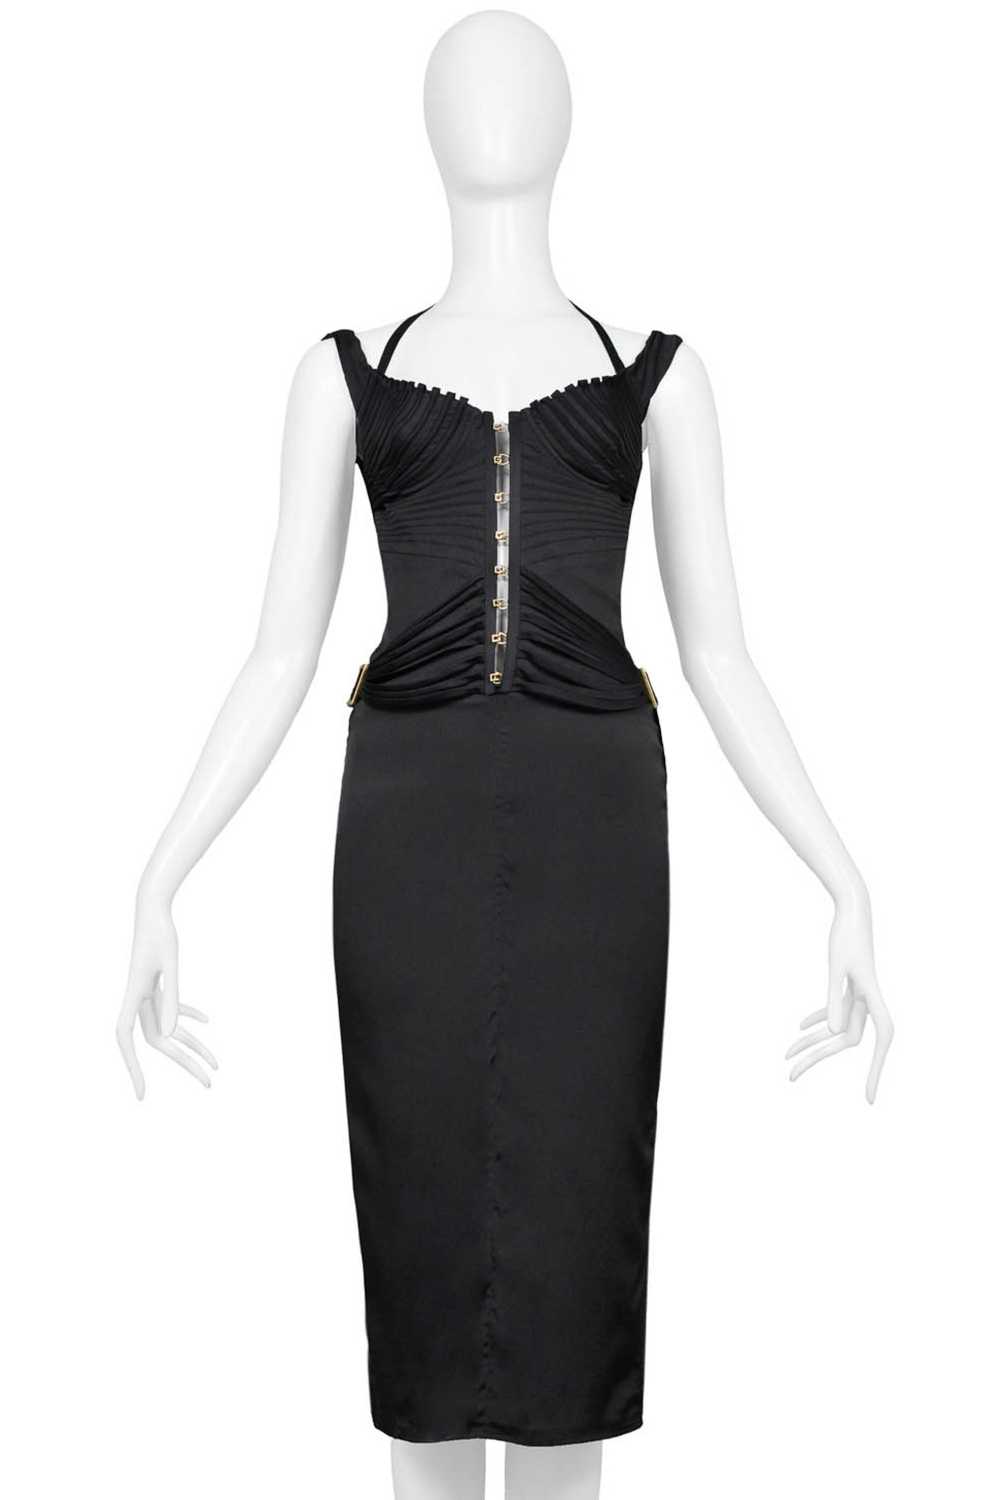 GUCCI BY TOM FORD BLACK CORSET COCKTAIL DRESS 2003 - image 1